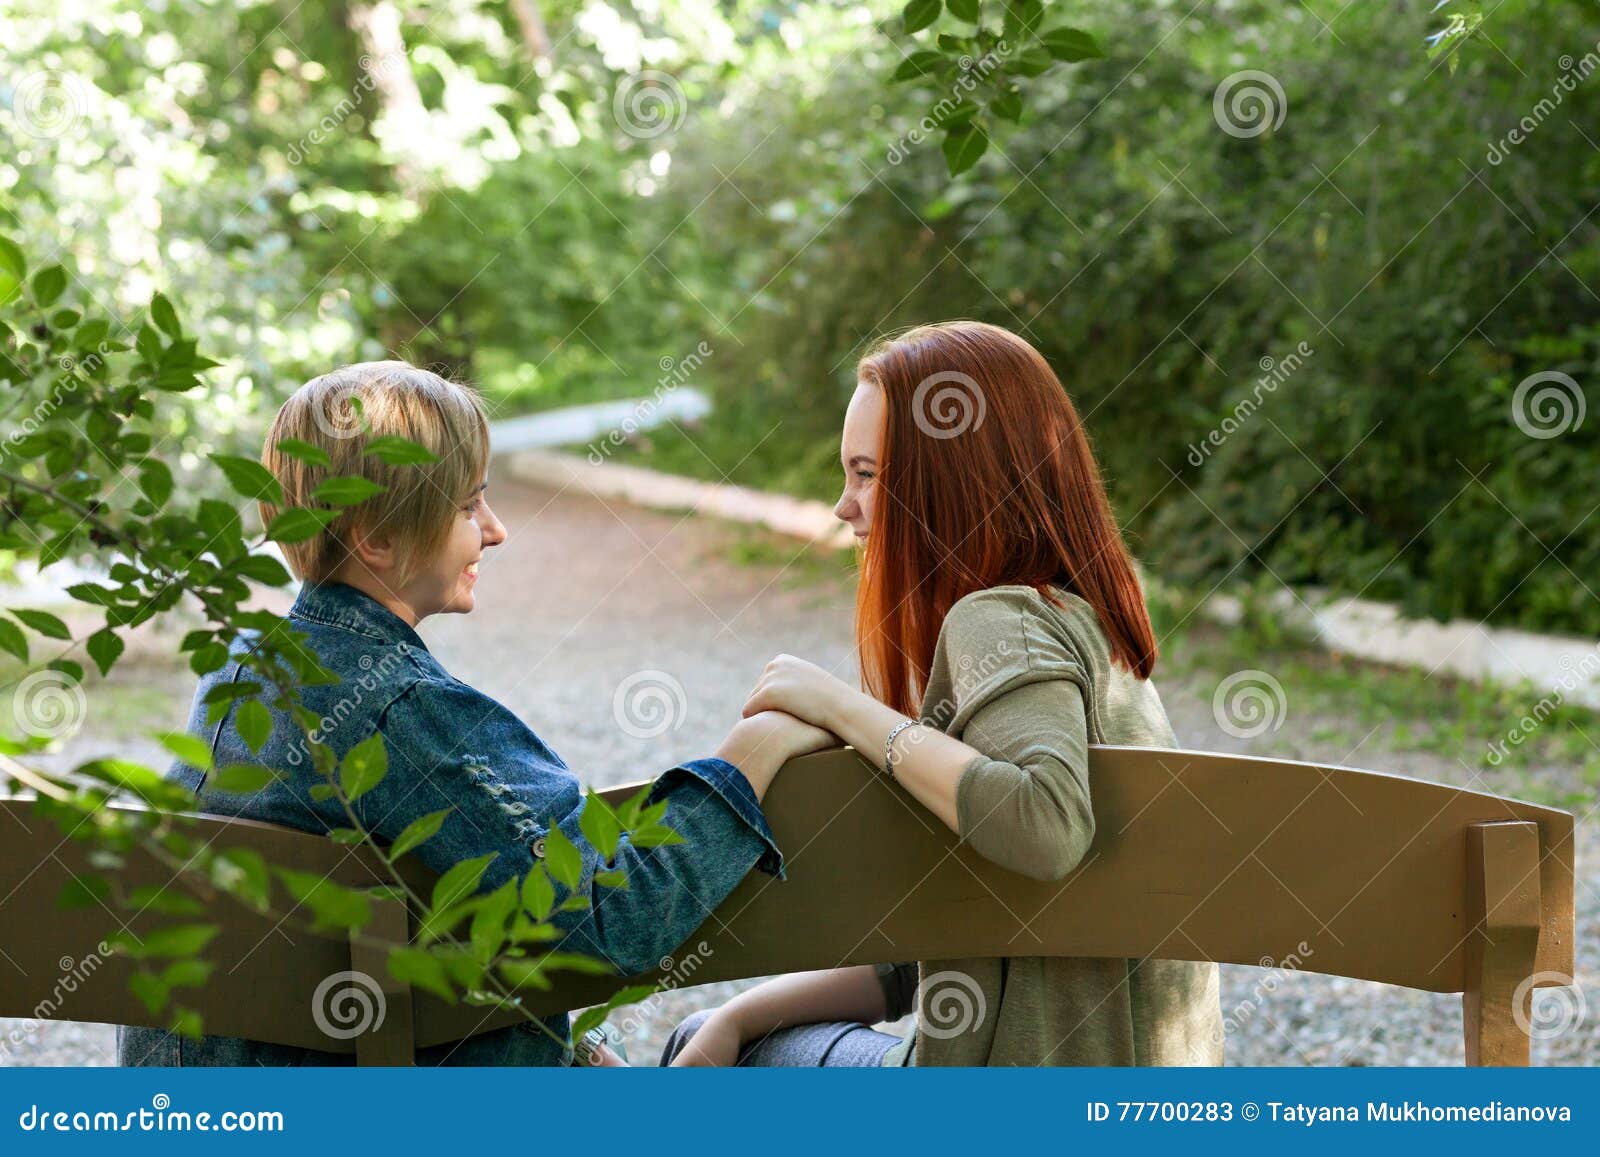 LGBT Women. Young Lesbian Couple Walking in the Park Together. Delicate Relationship picture